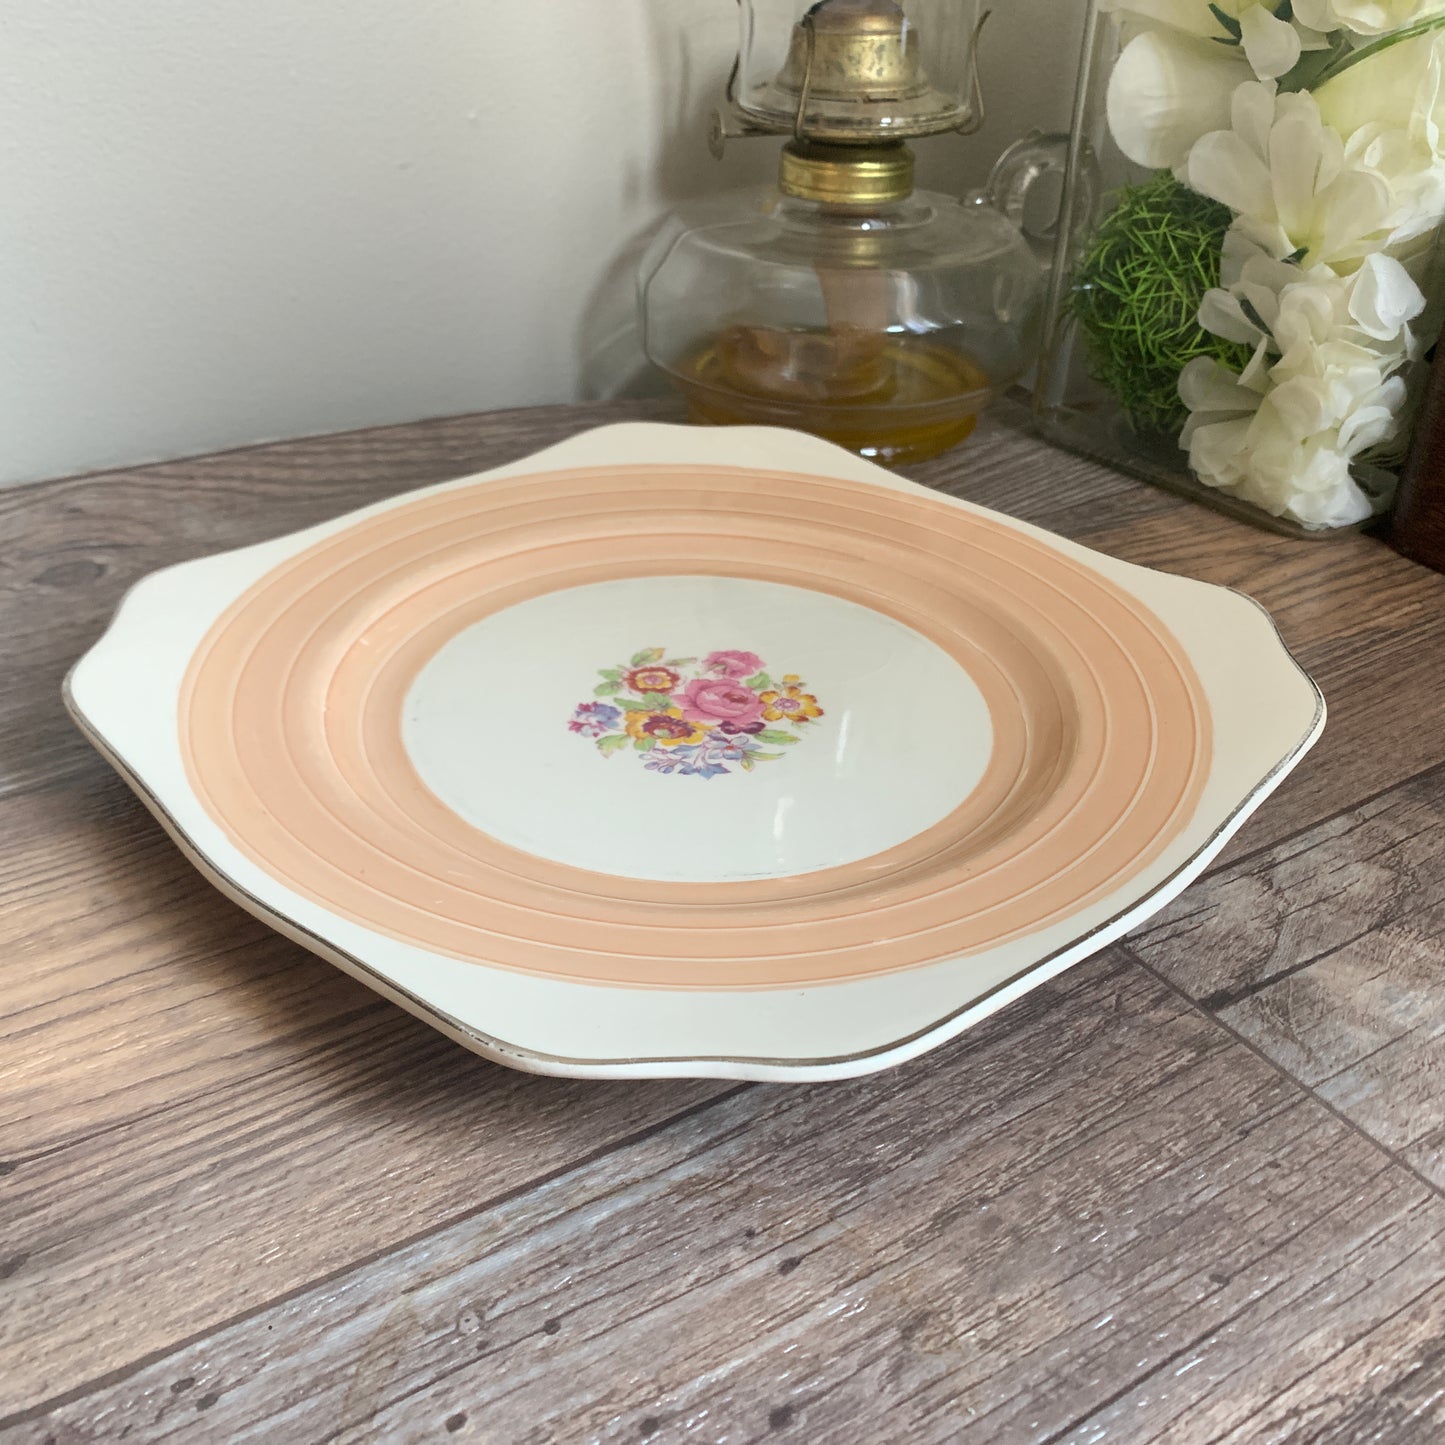 Vintage China Plate Simpsons (Potters Ltd) Peach and Cream Square Plate